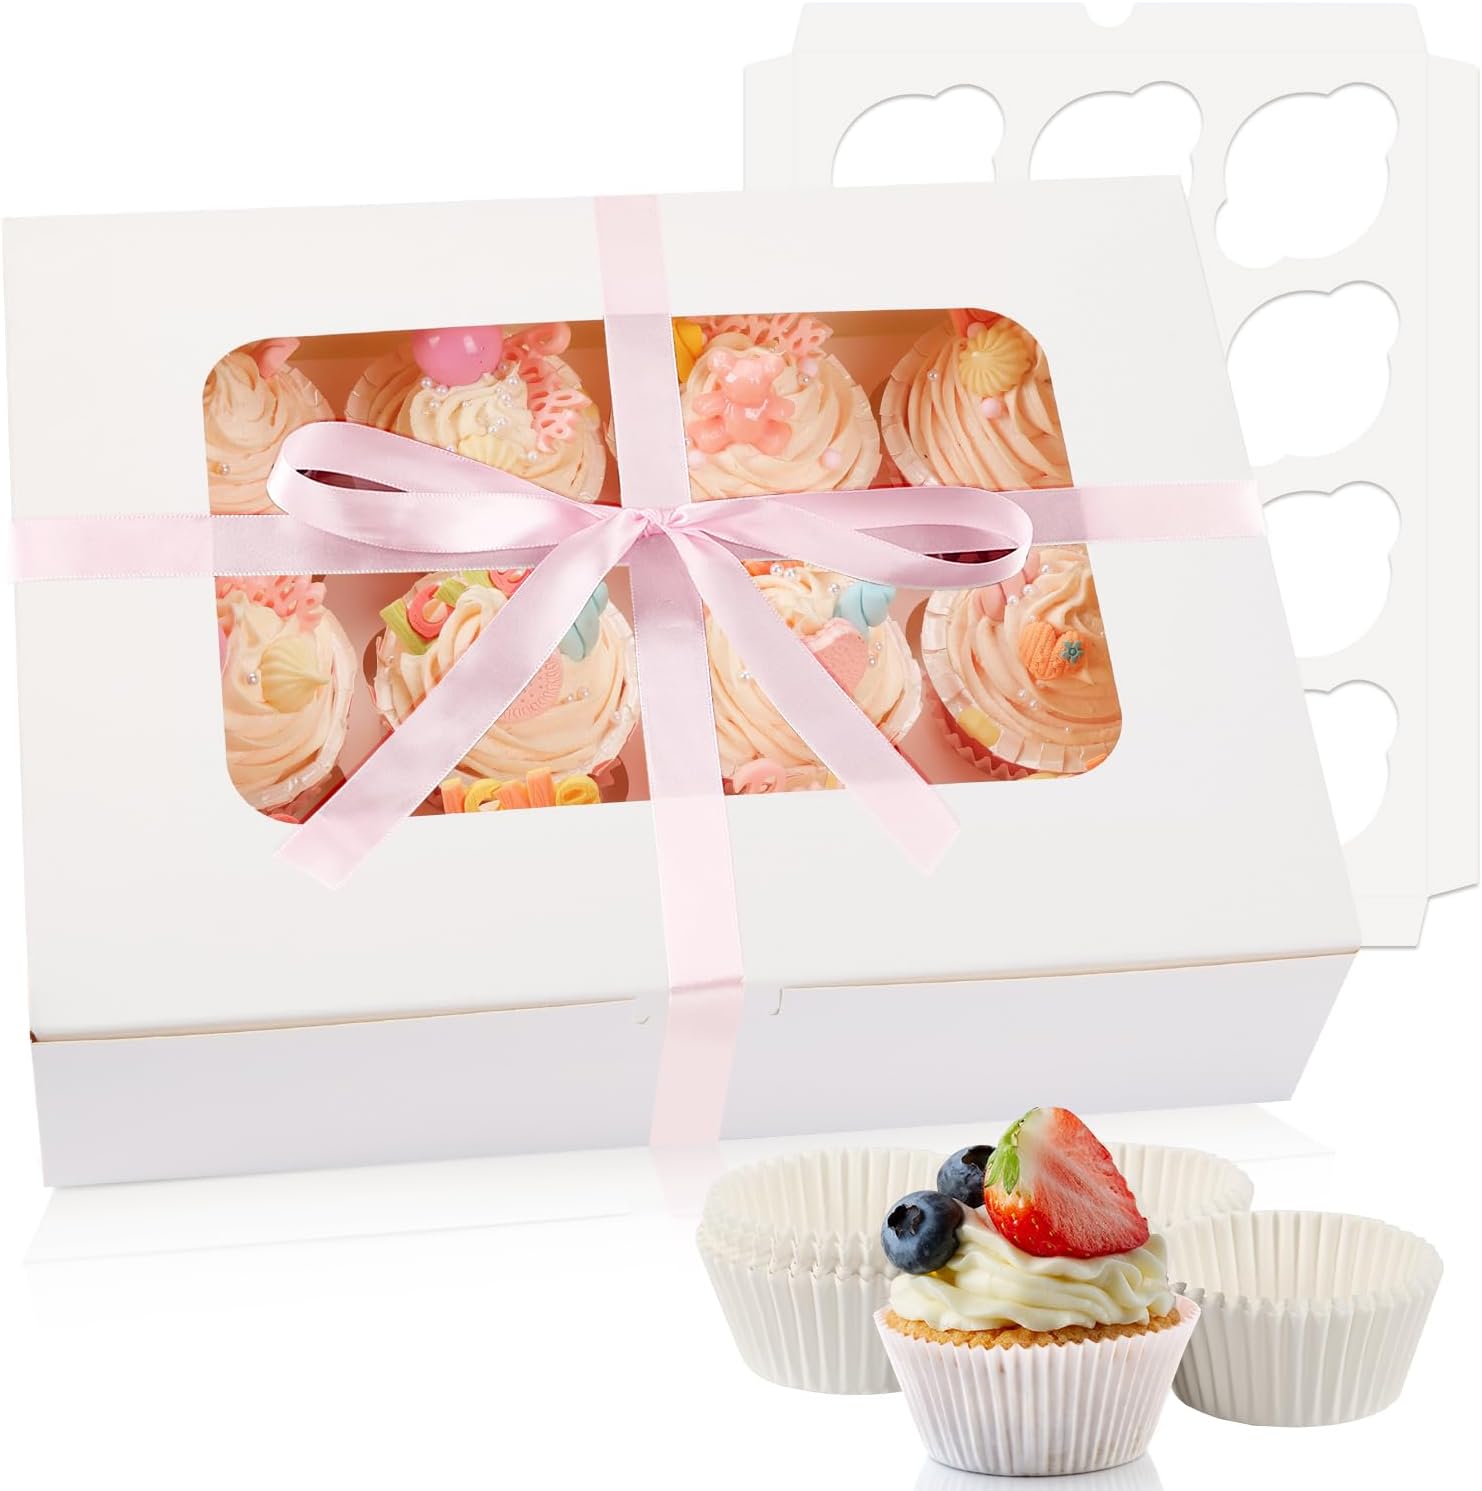 The cupcake boxes are sturdy, and easy to assemble. I didn't realize it included cups and bows! What a nice surprise